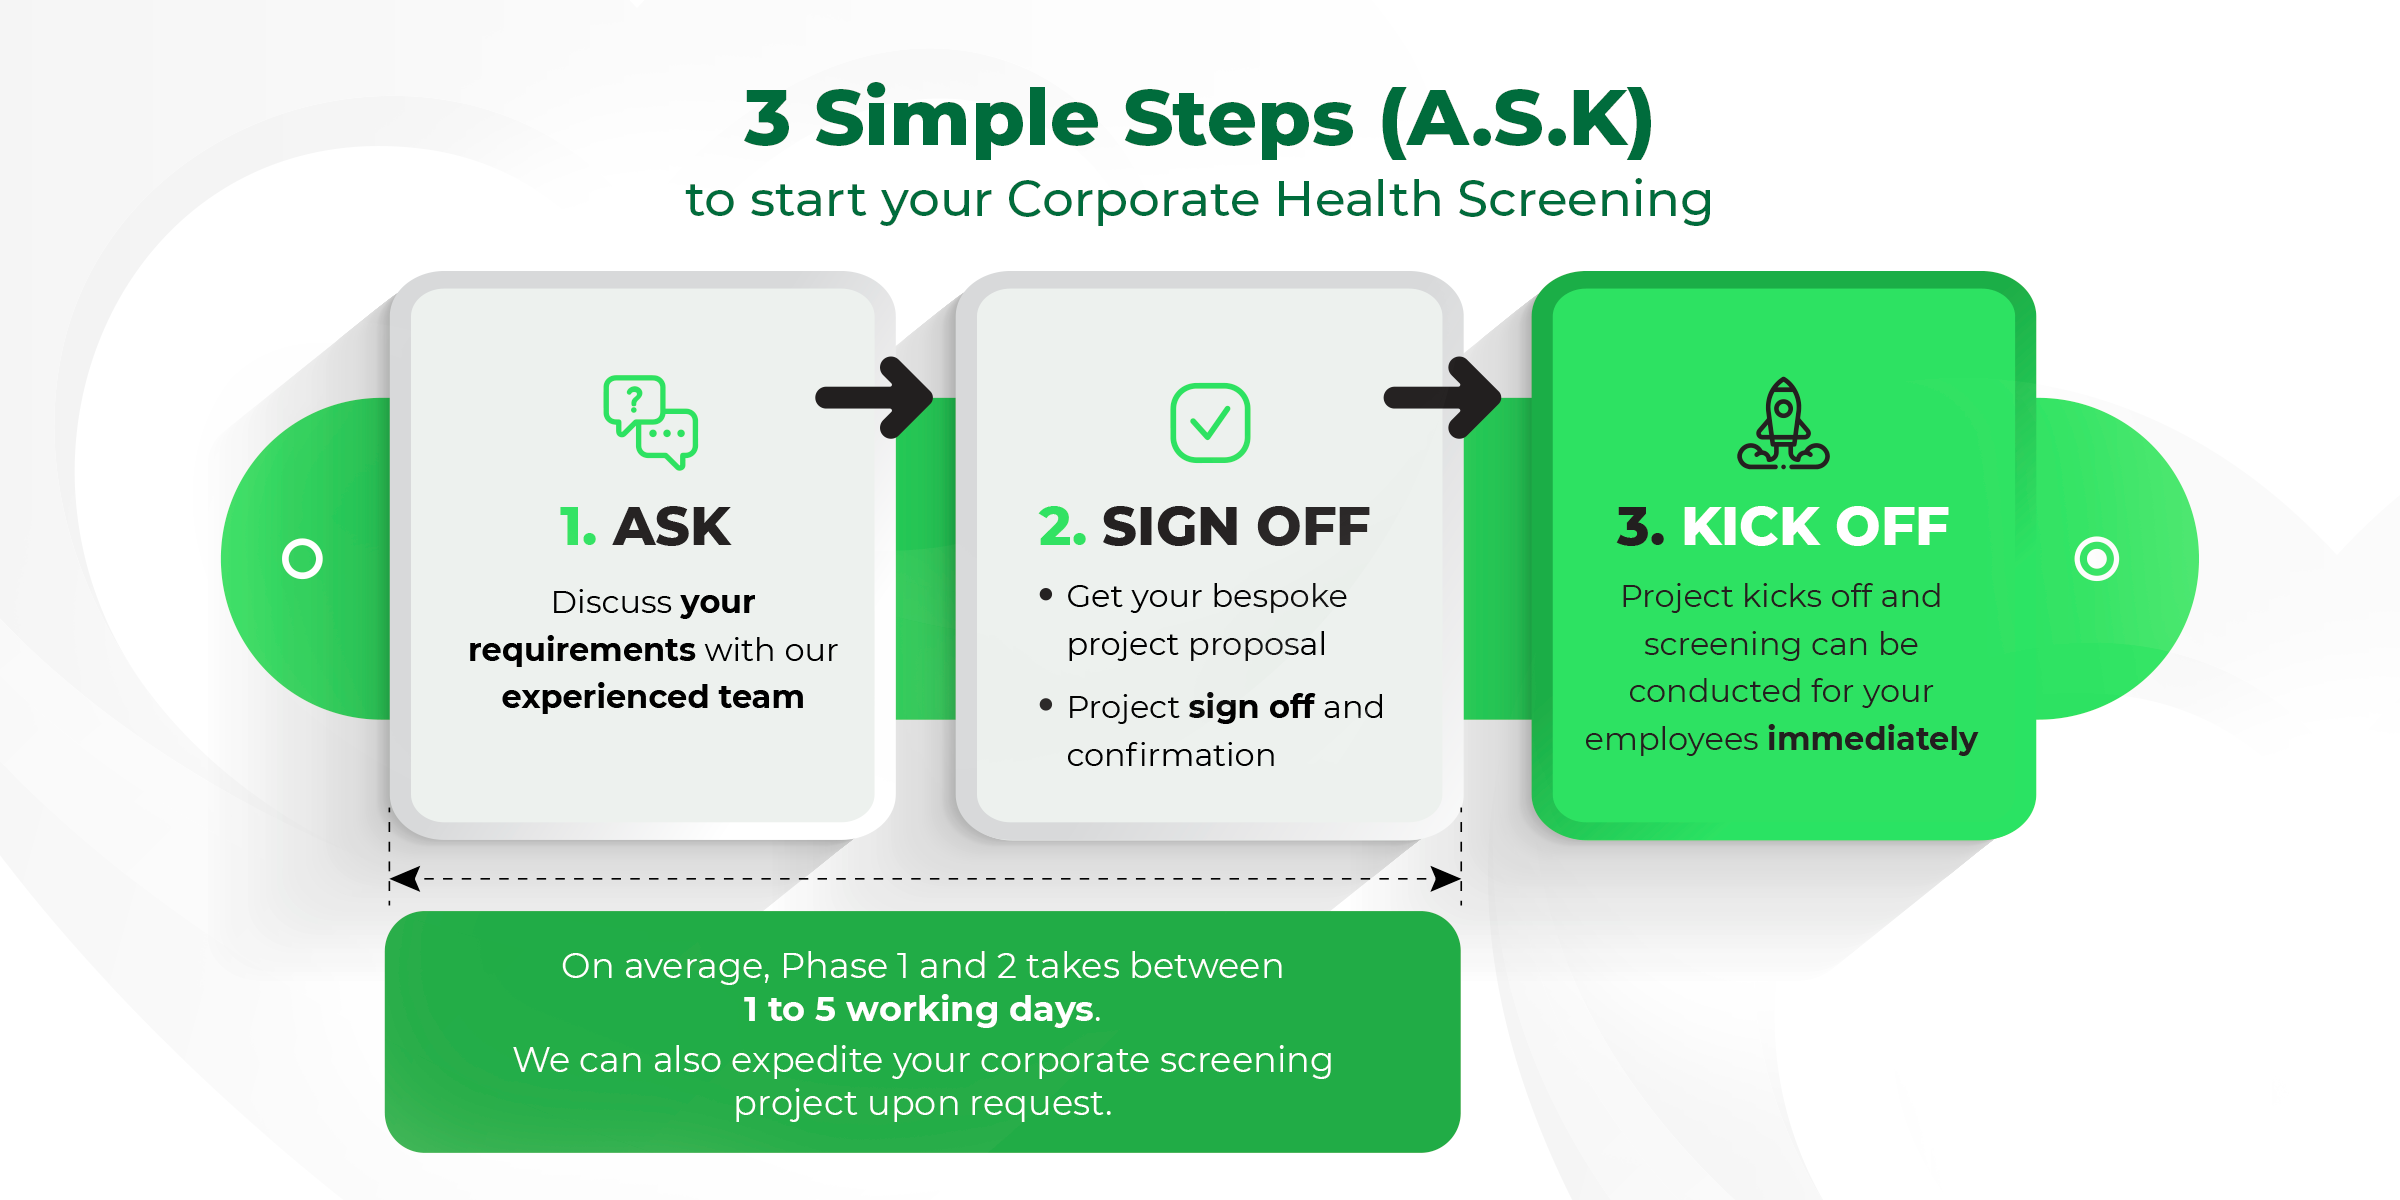 Follow these 3 simple steps to start your Corporate Health Screening journey with us.